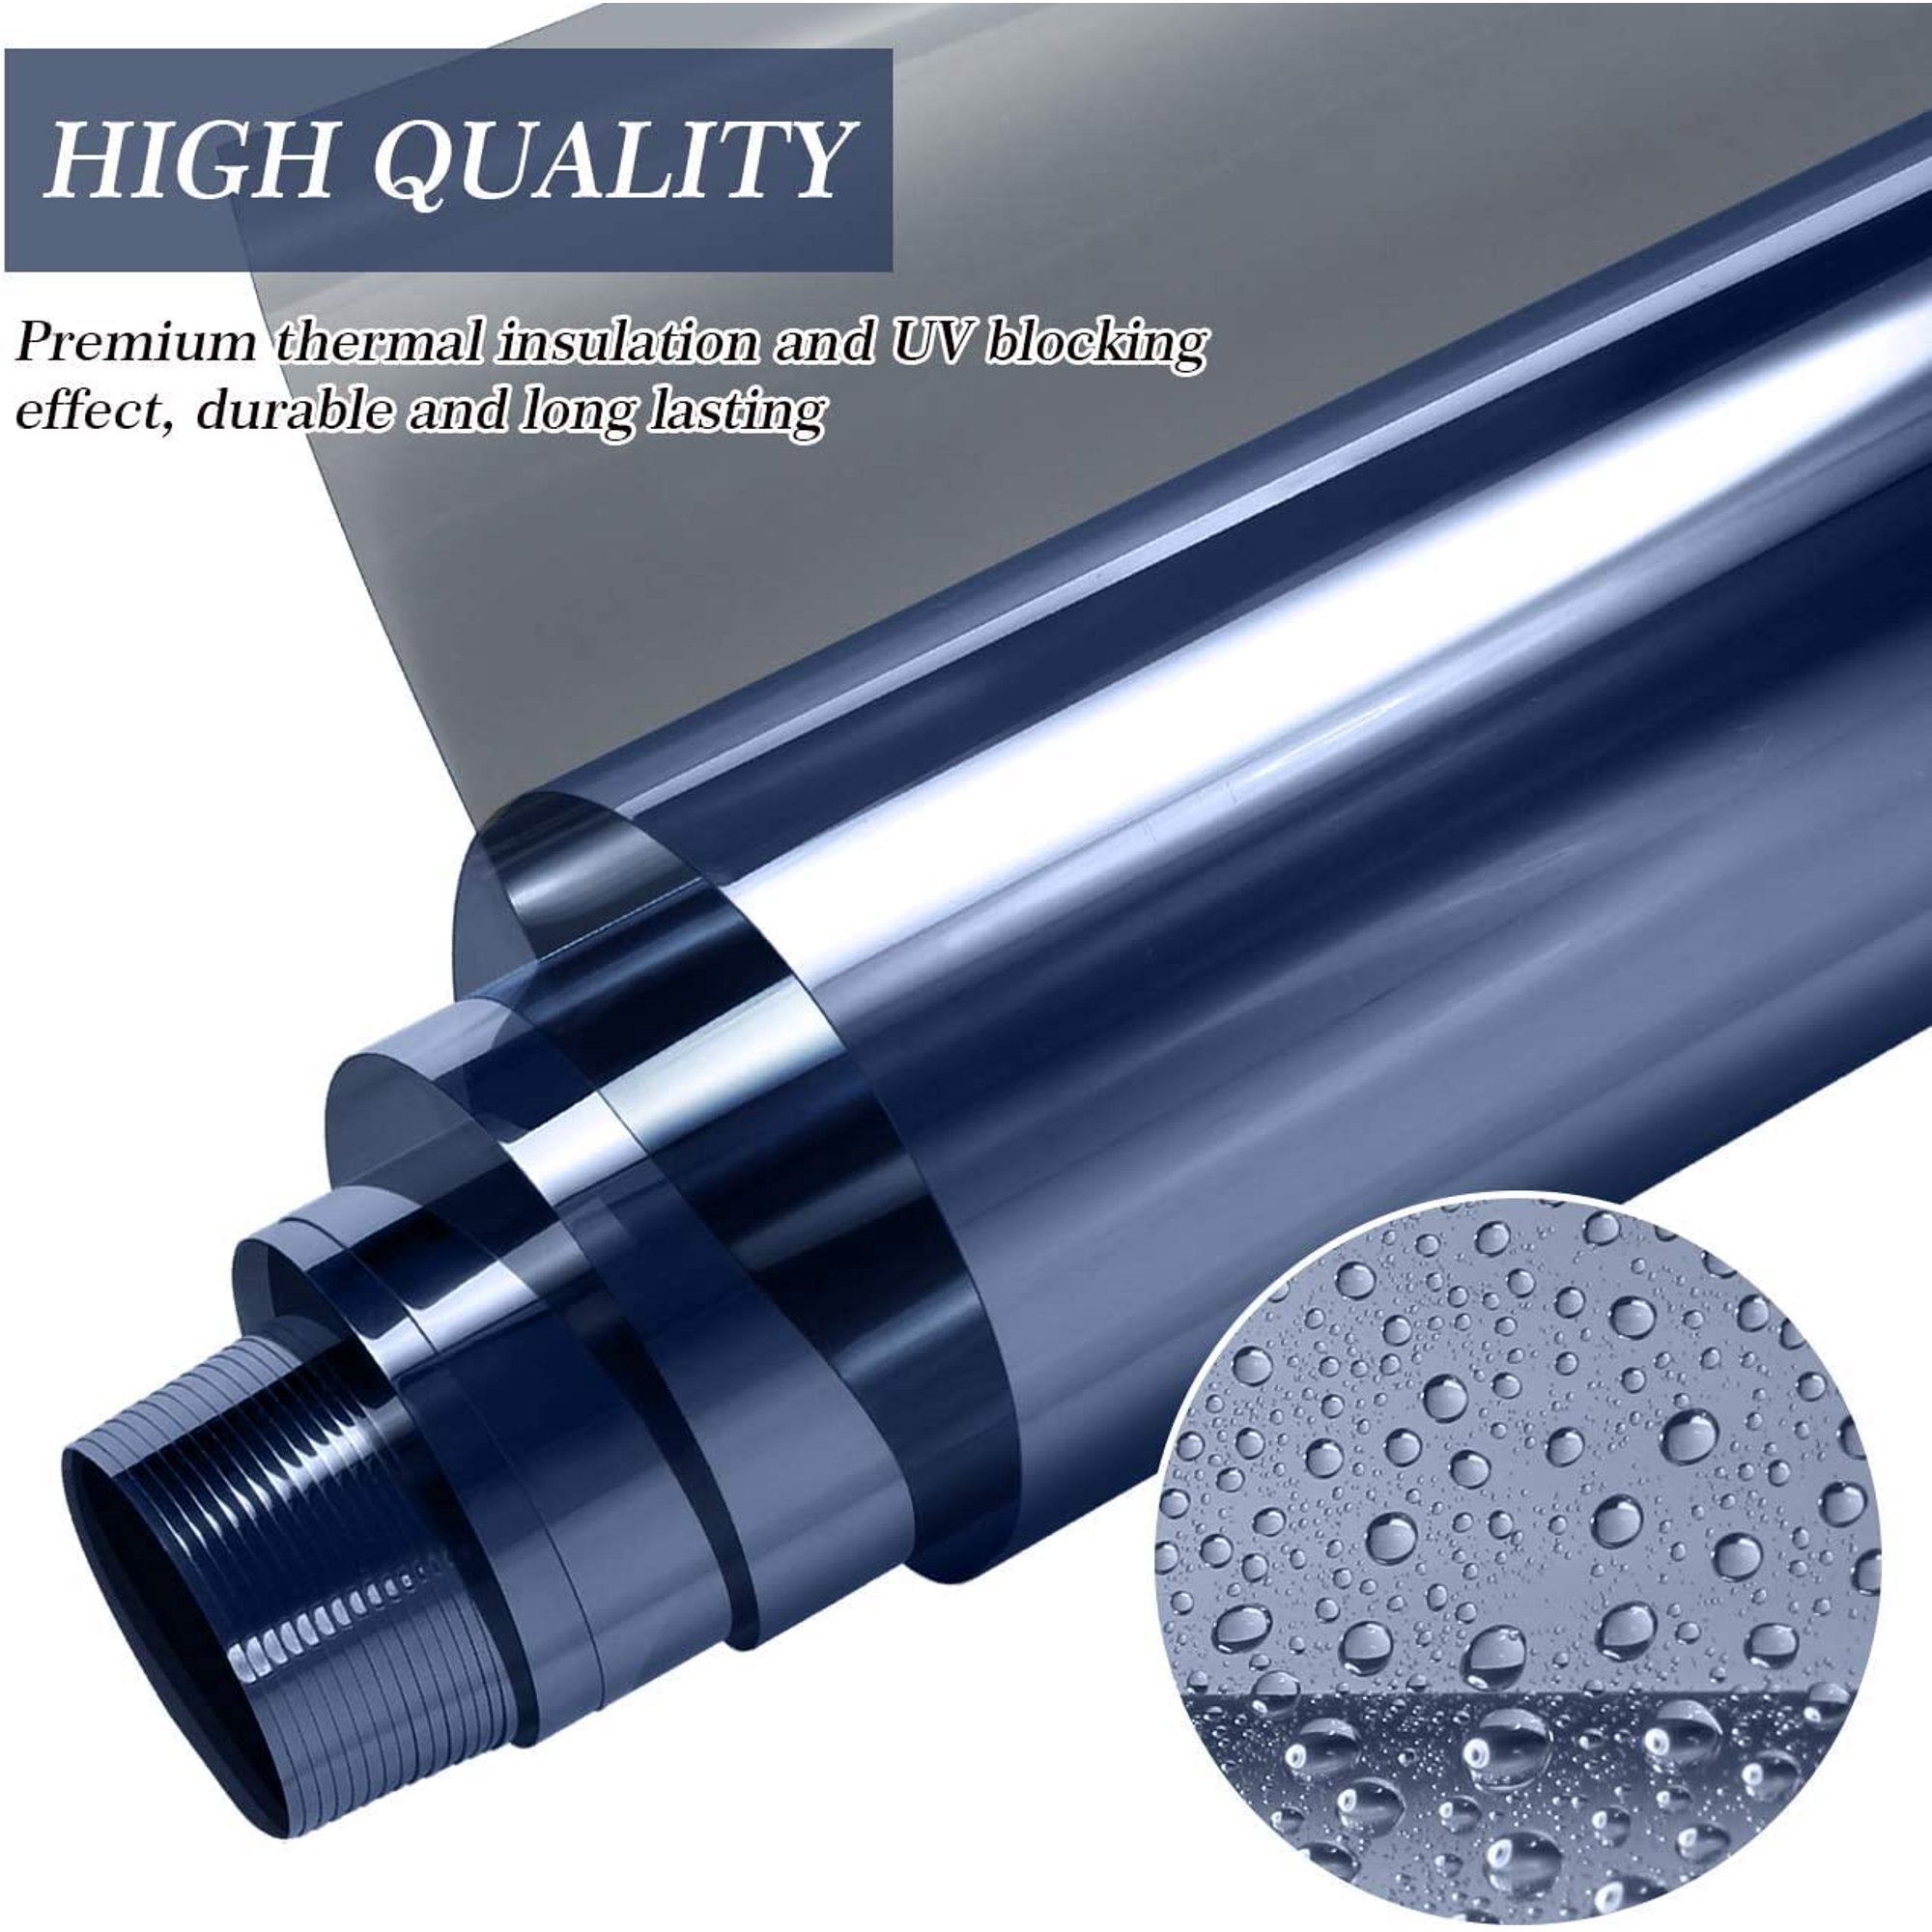 Non-Adhesive Heat Control Window Film One Way Static Cling Window Tint, Blue-Silver